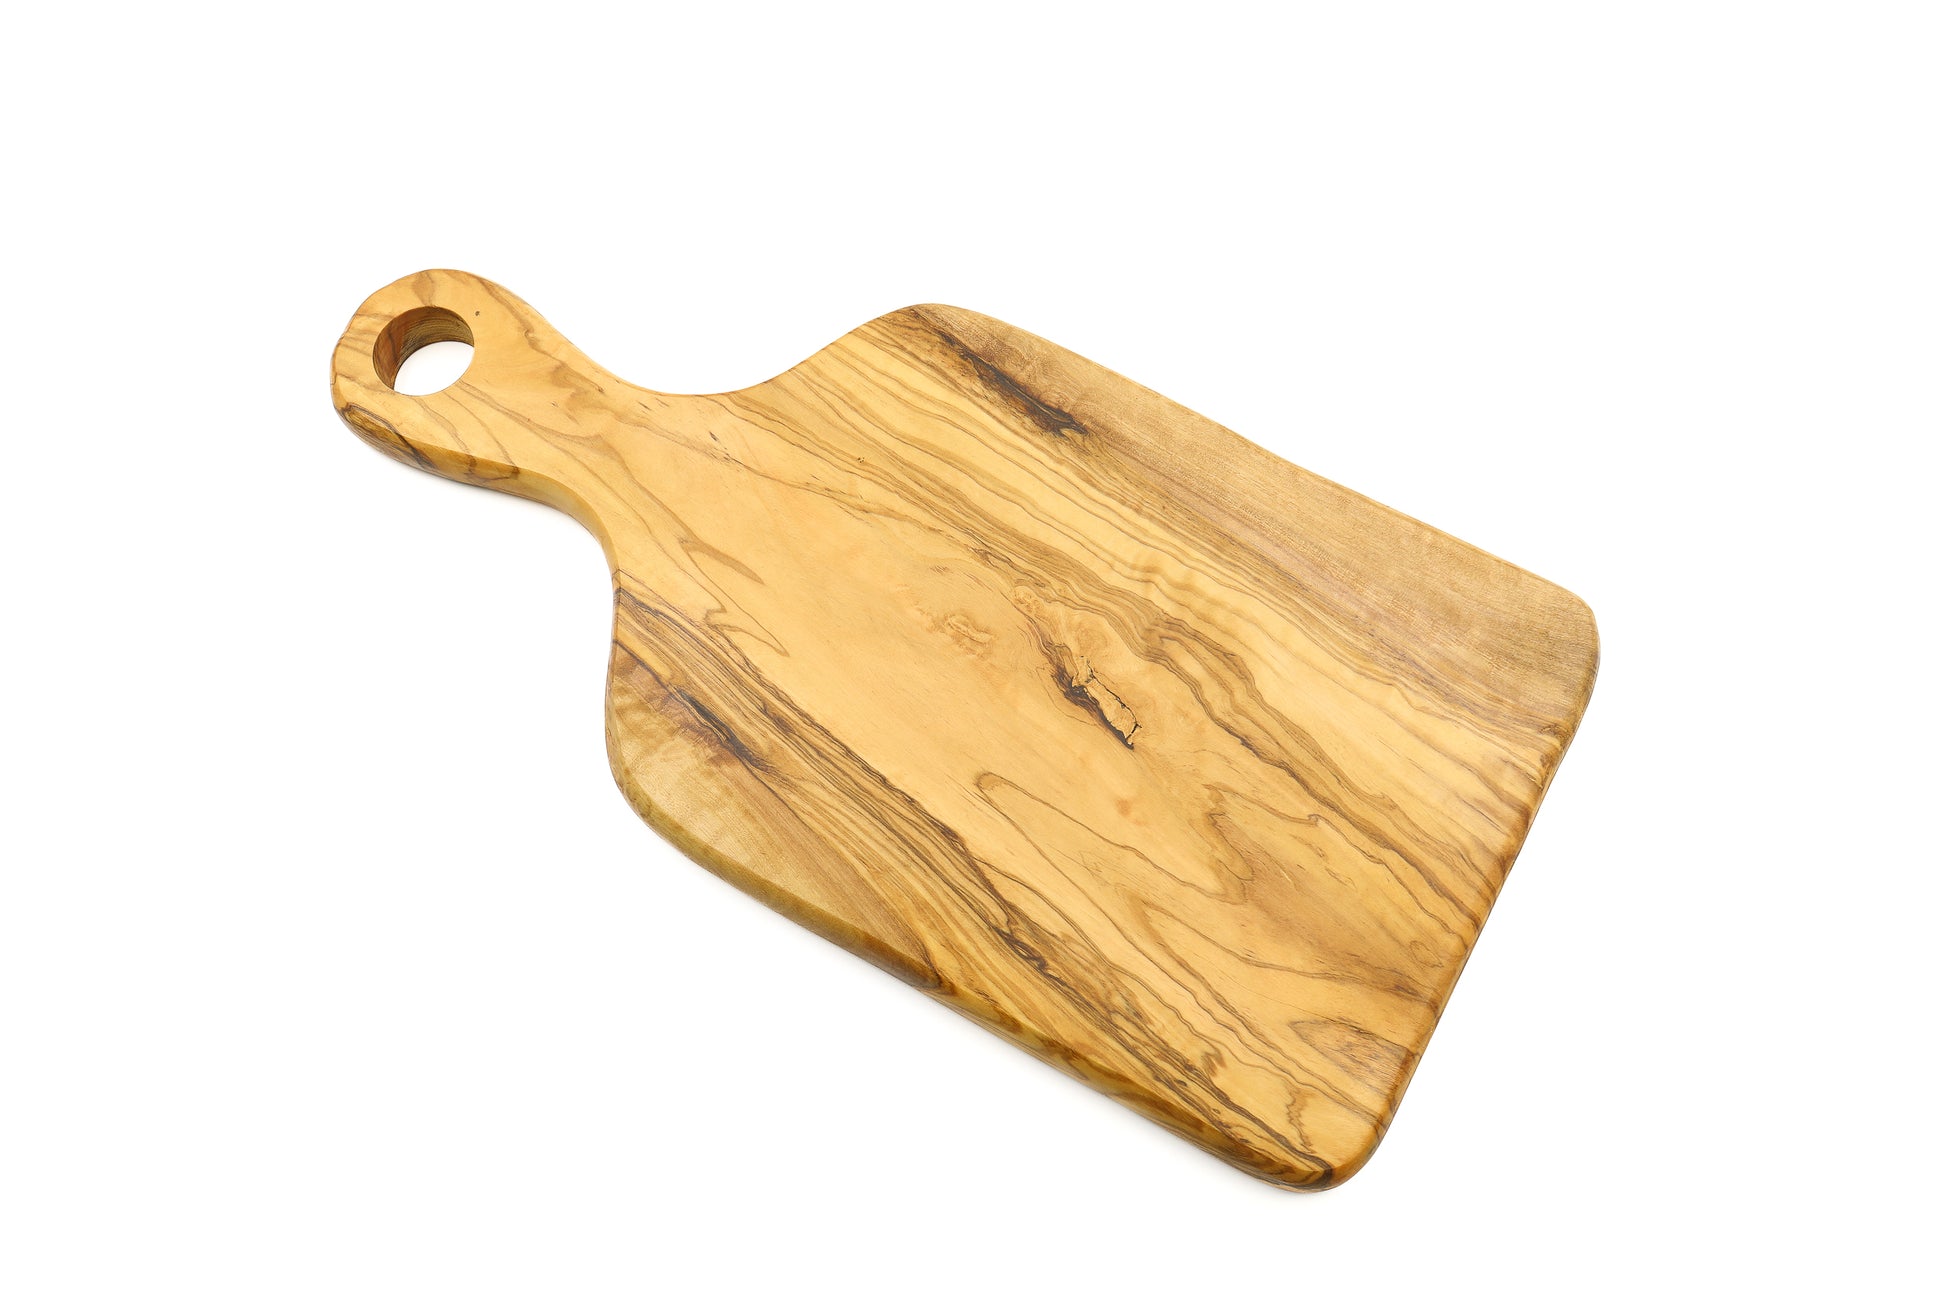 Artisan-made cutting board in beautiful olive wood, with a handle